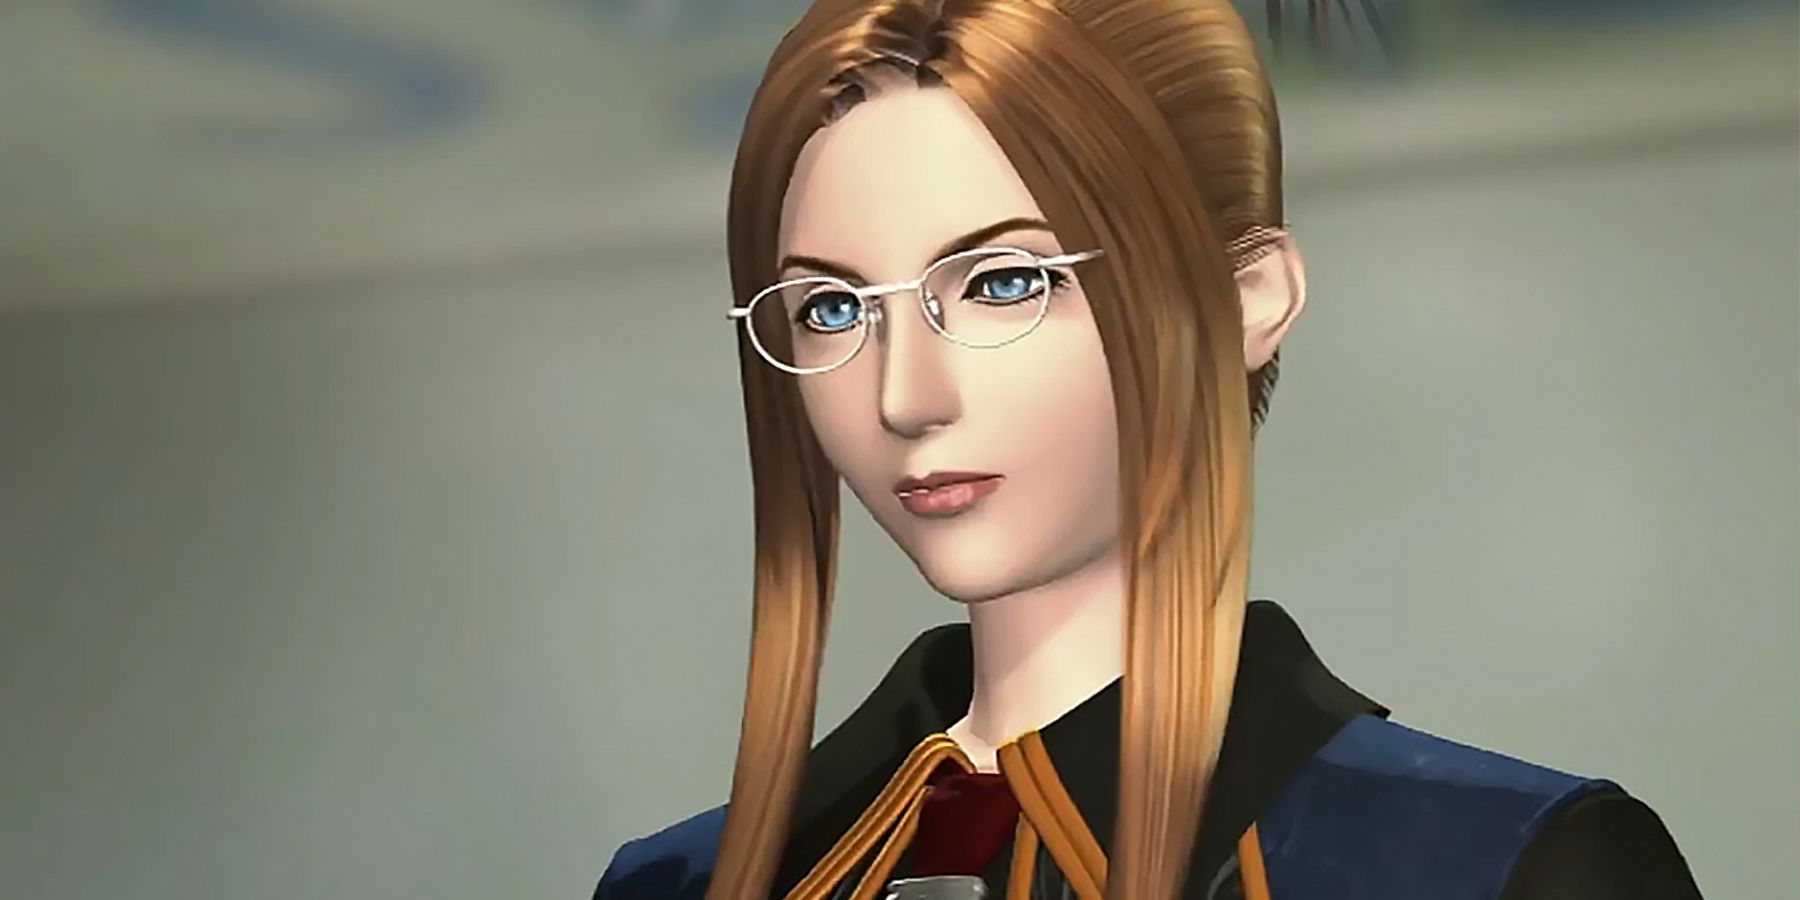 Quistis Trepe with glasses in Final Fantasy 8